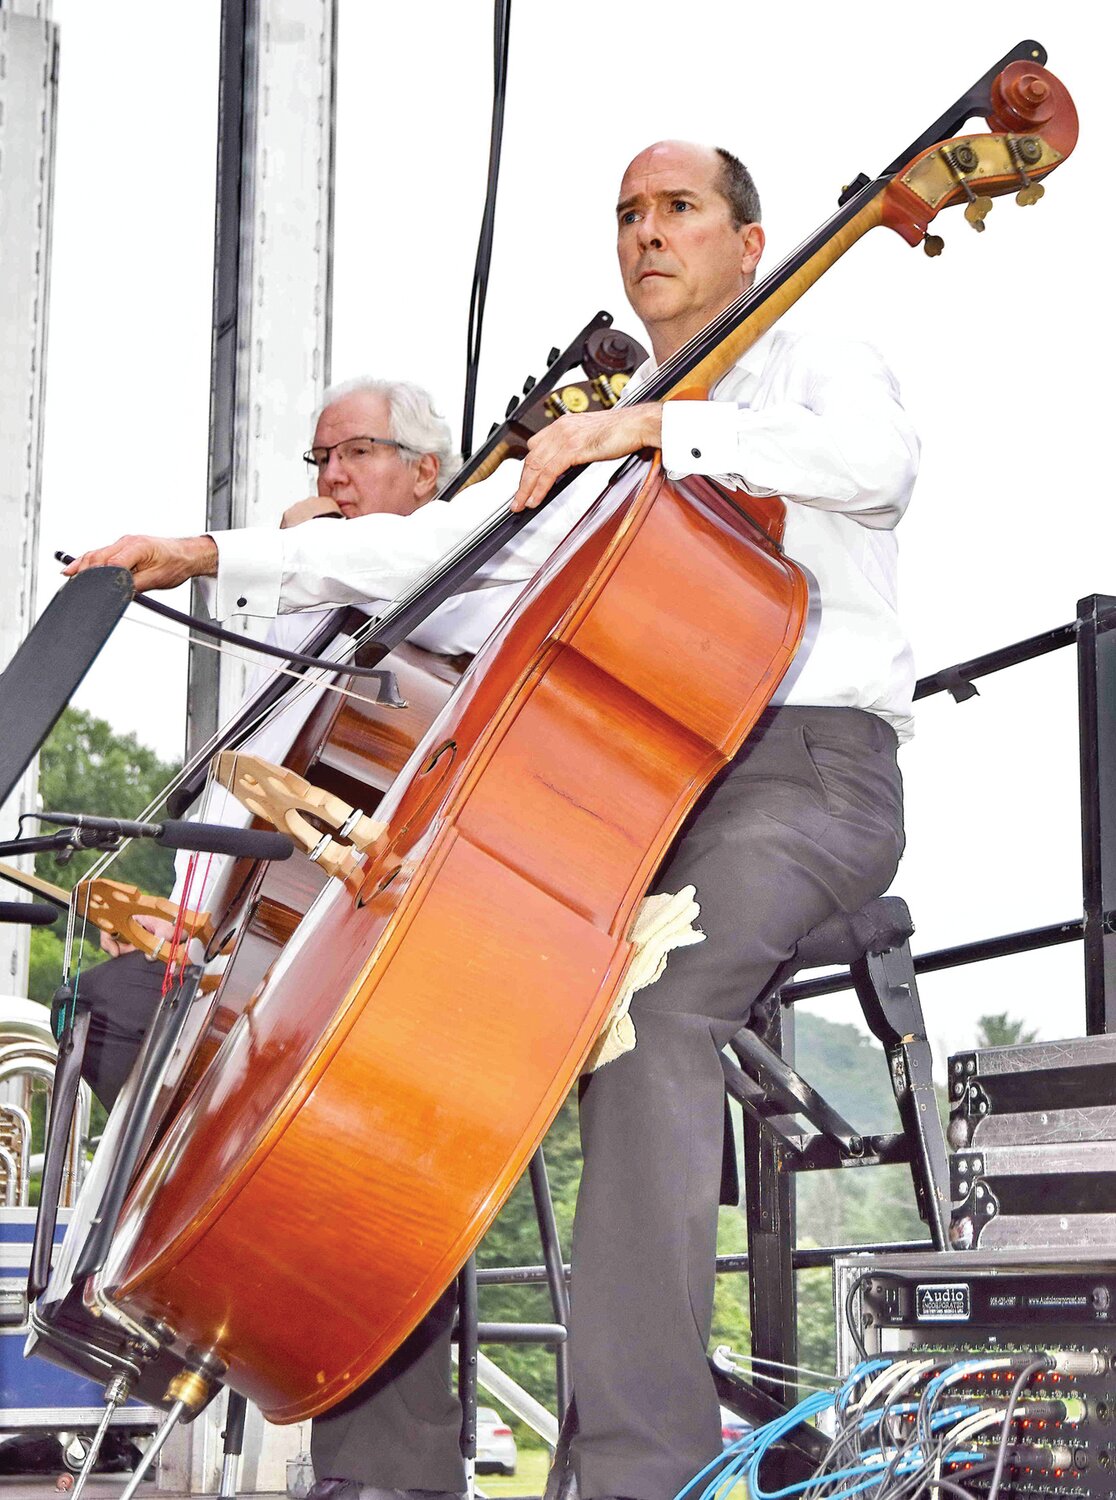 A member of the orchestra plays a double bass.